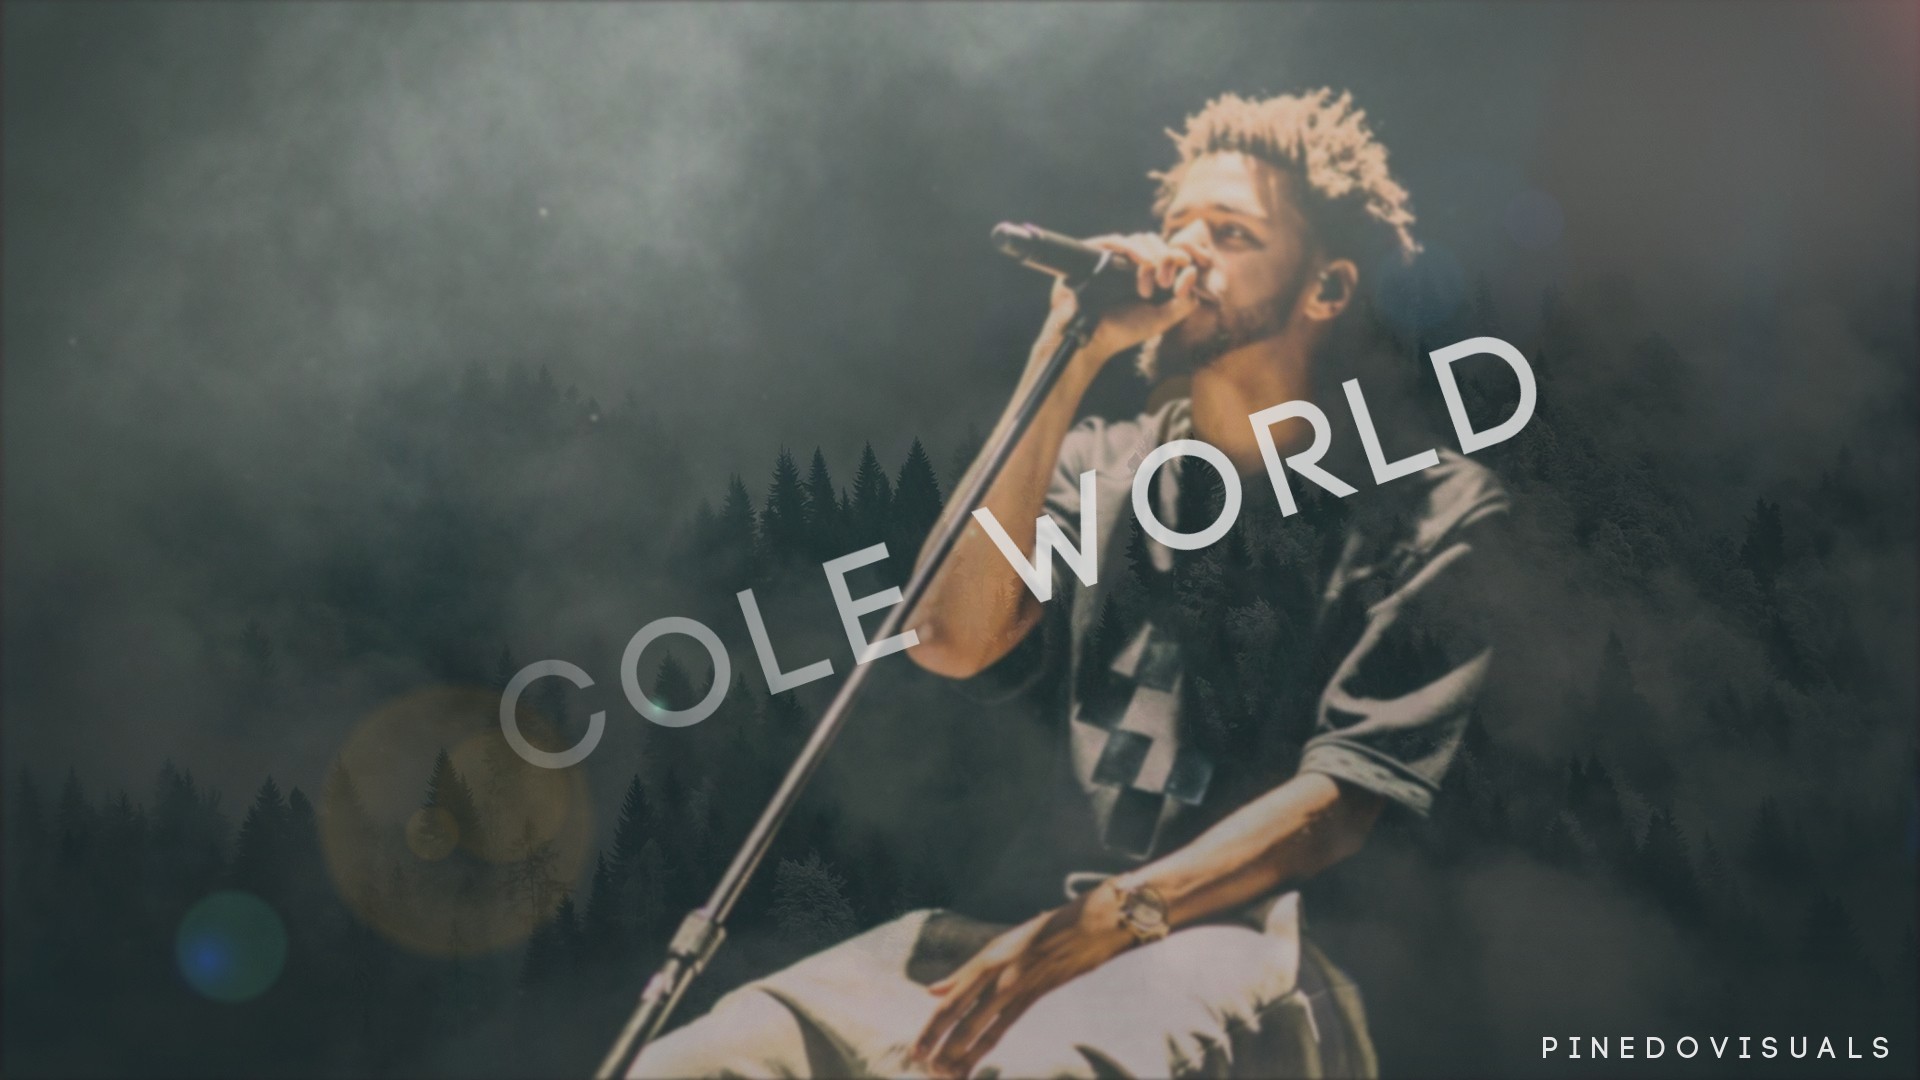 People 1920x1080 J. Cole hip hop musician music Rapper nature trees dark forest text watermarked men singer microphone